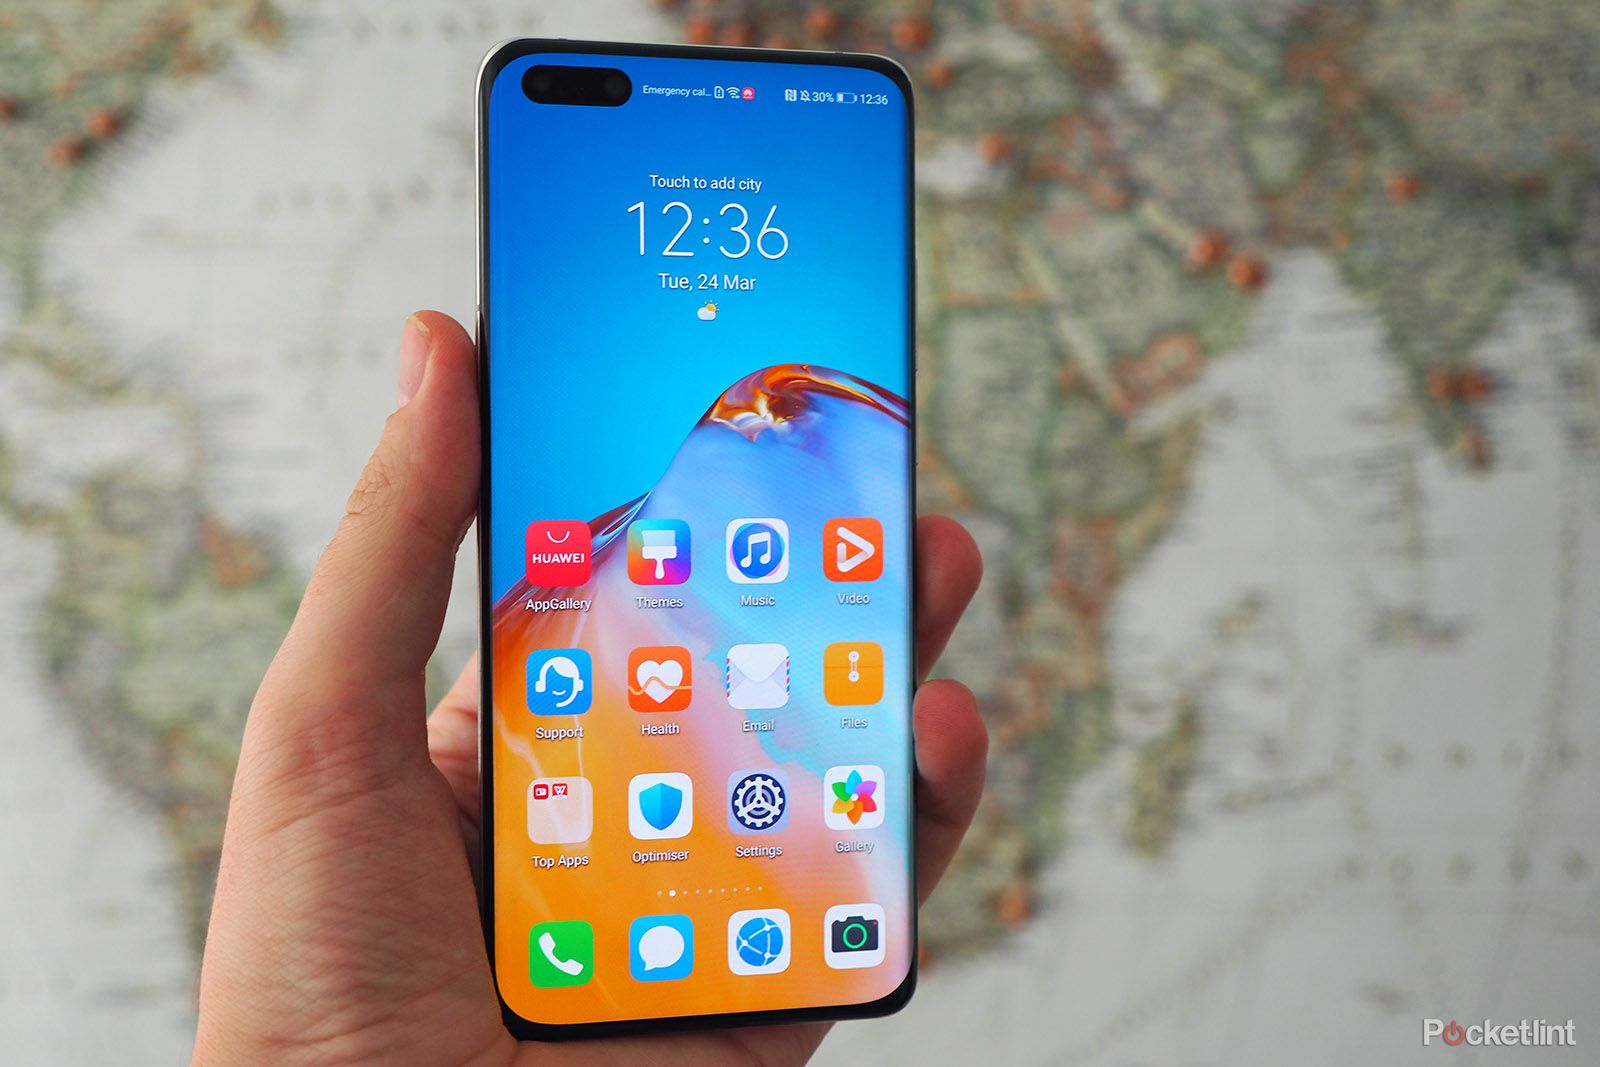 Huawei says upcoming product launches are 